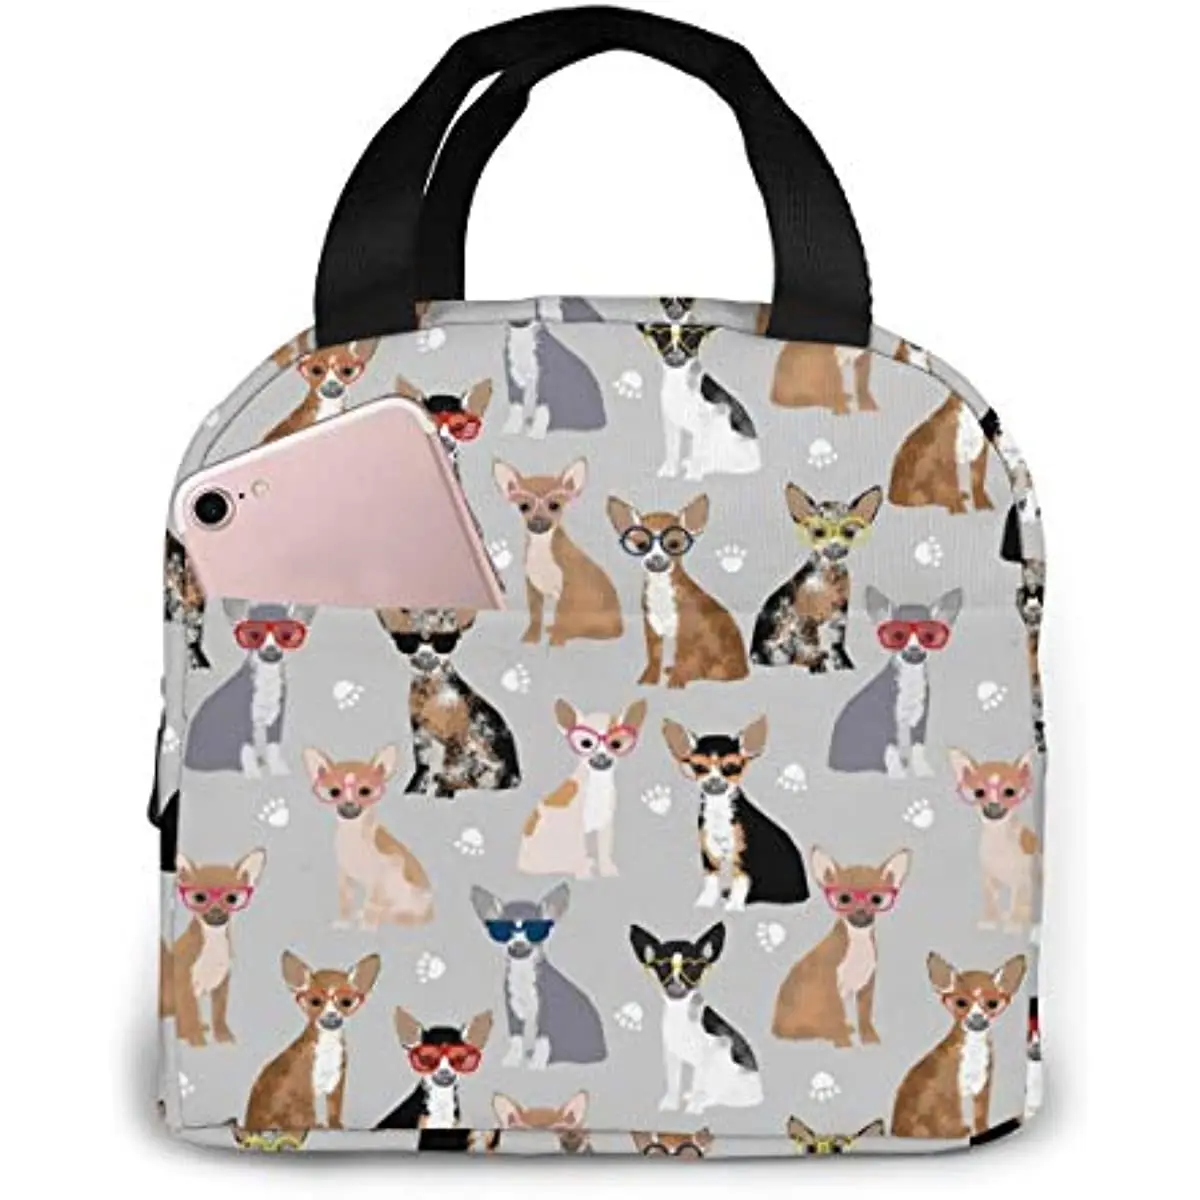 

Chihuahua Dog Lunch Bag Insulated Picnic Pouch Thermal Cooler Tote Bento Large Meal Prep Cute Bag Big Leakproof Soft Bags